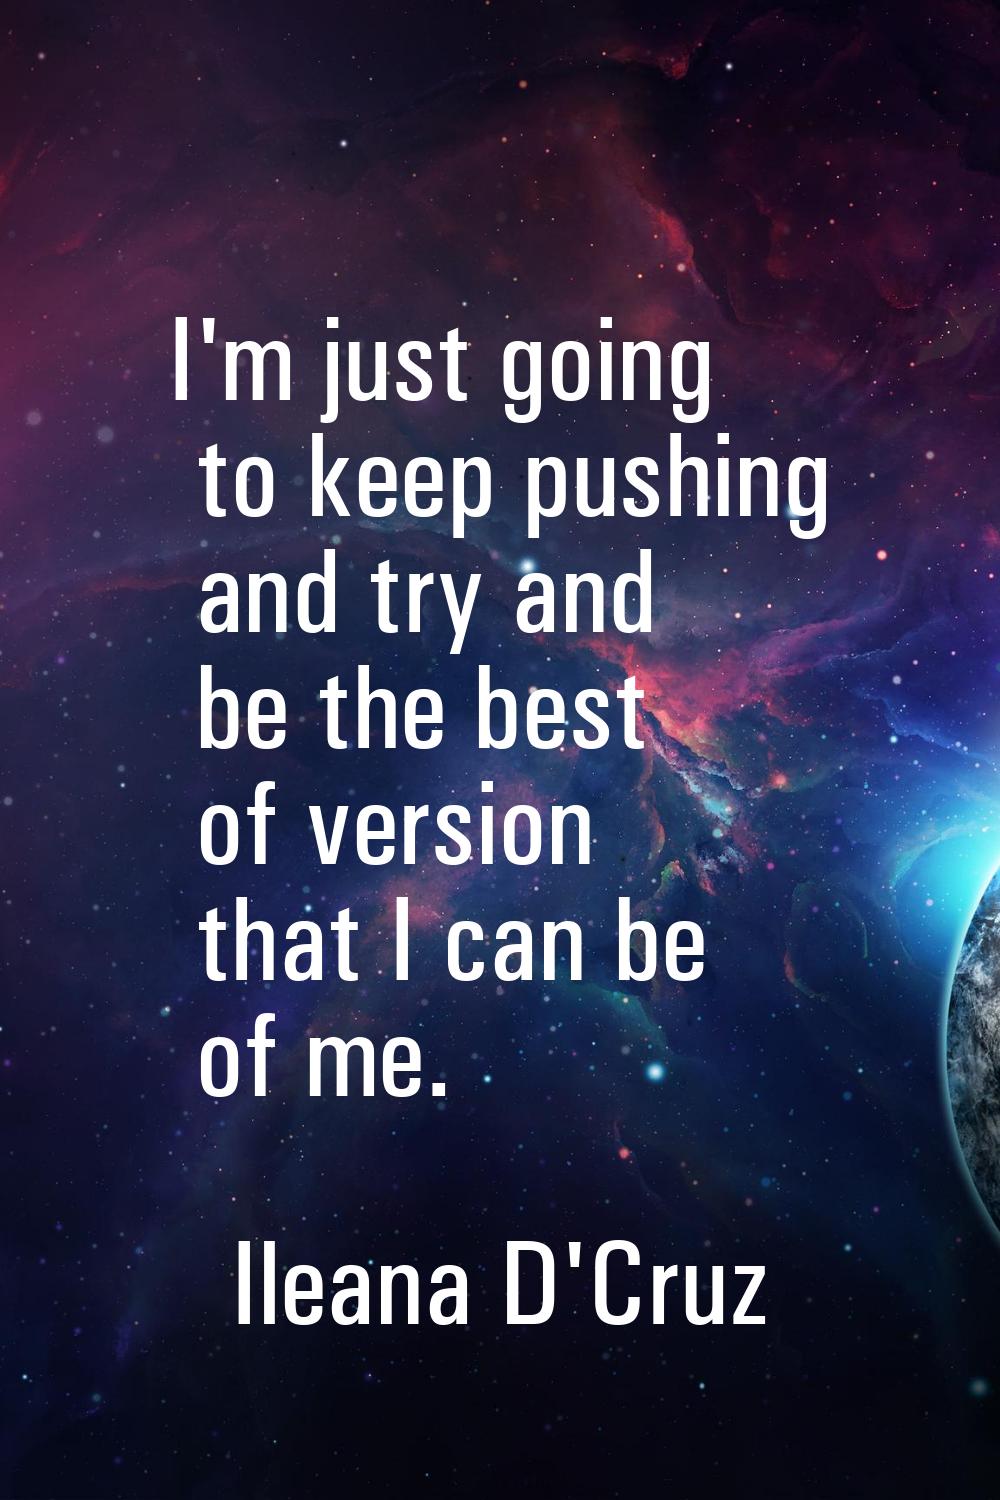 I'm just going to keep pushing and try and be the best of version that I can be of me.